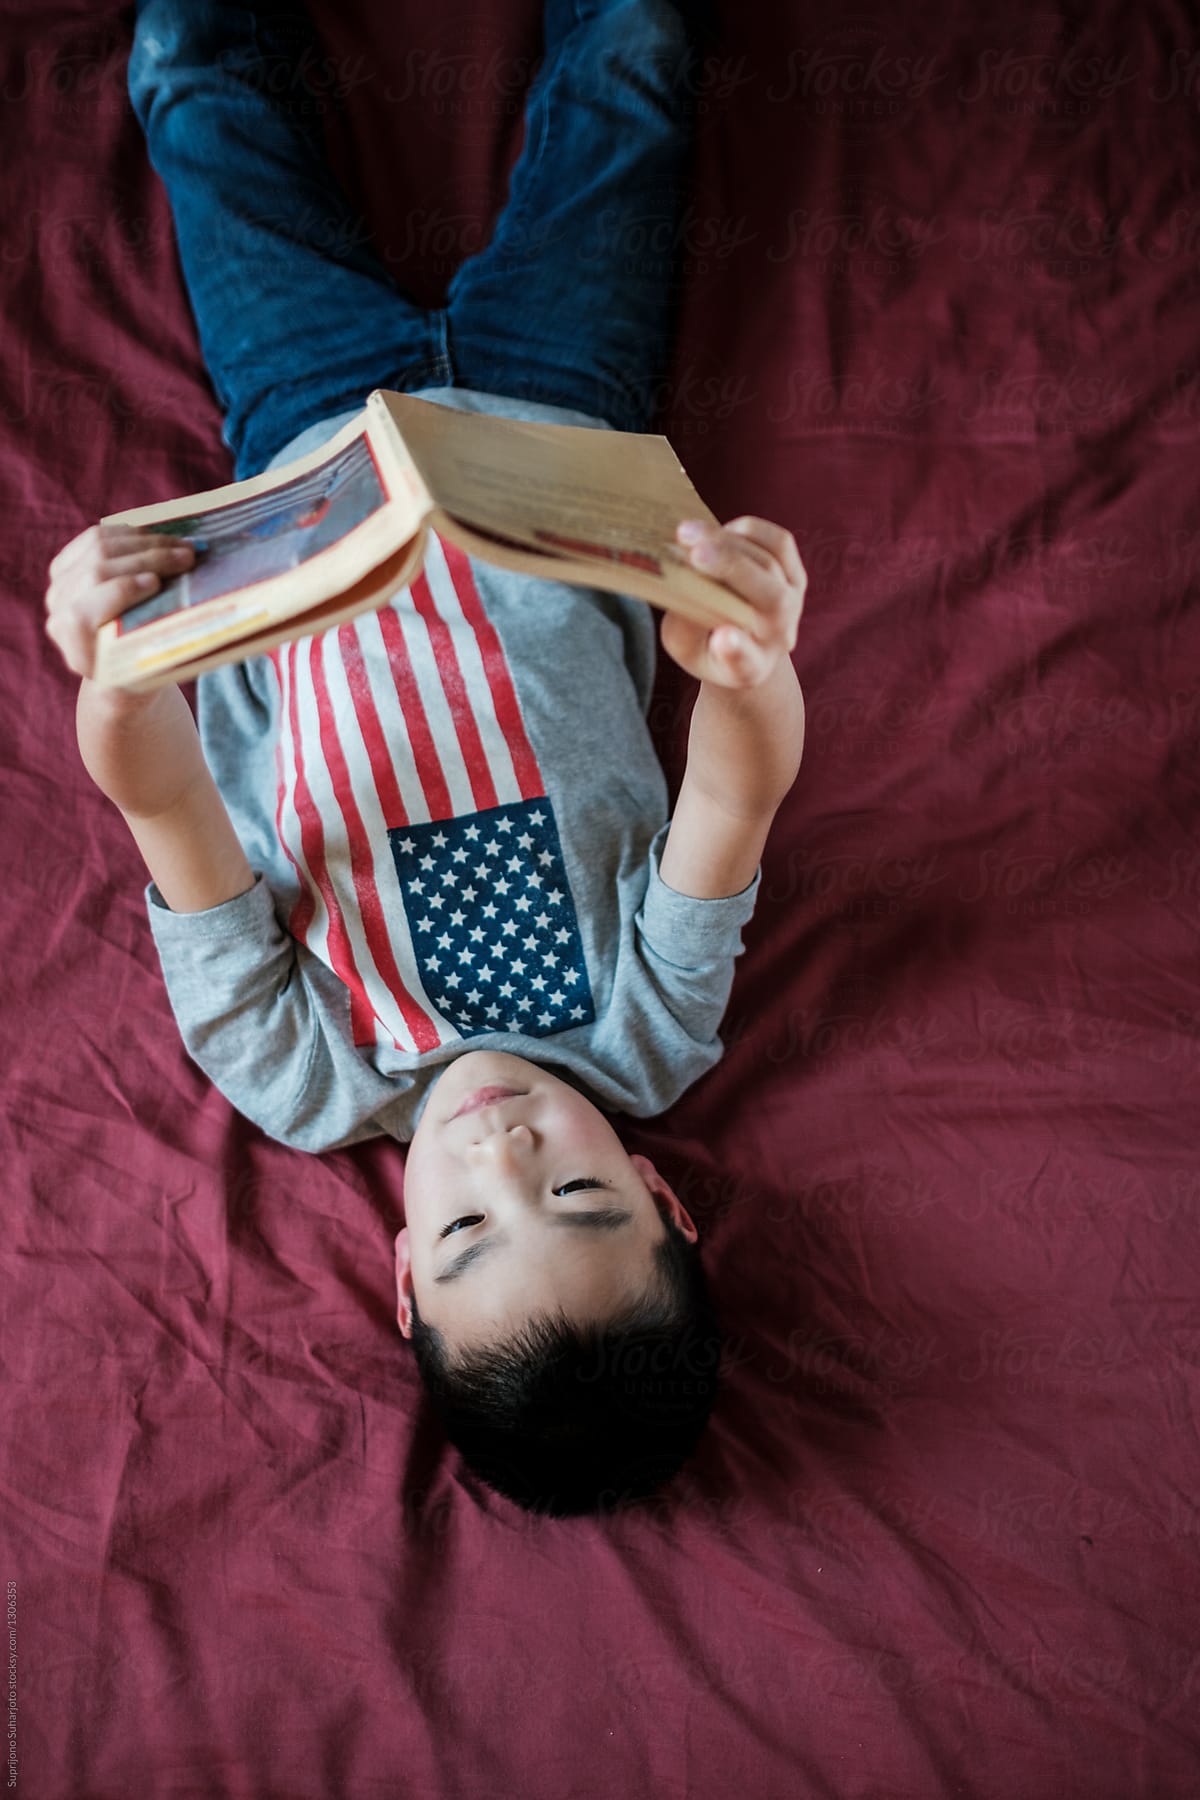 Asian kid reading a book on bed